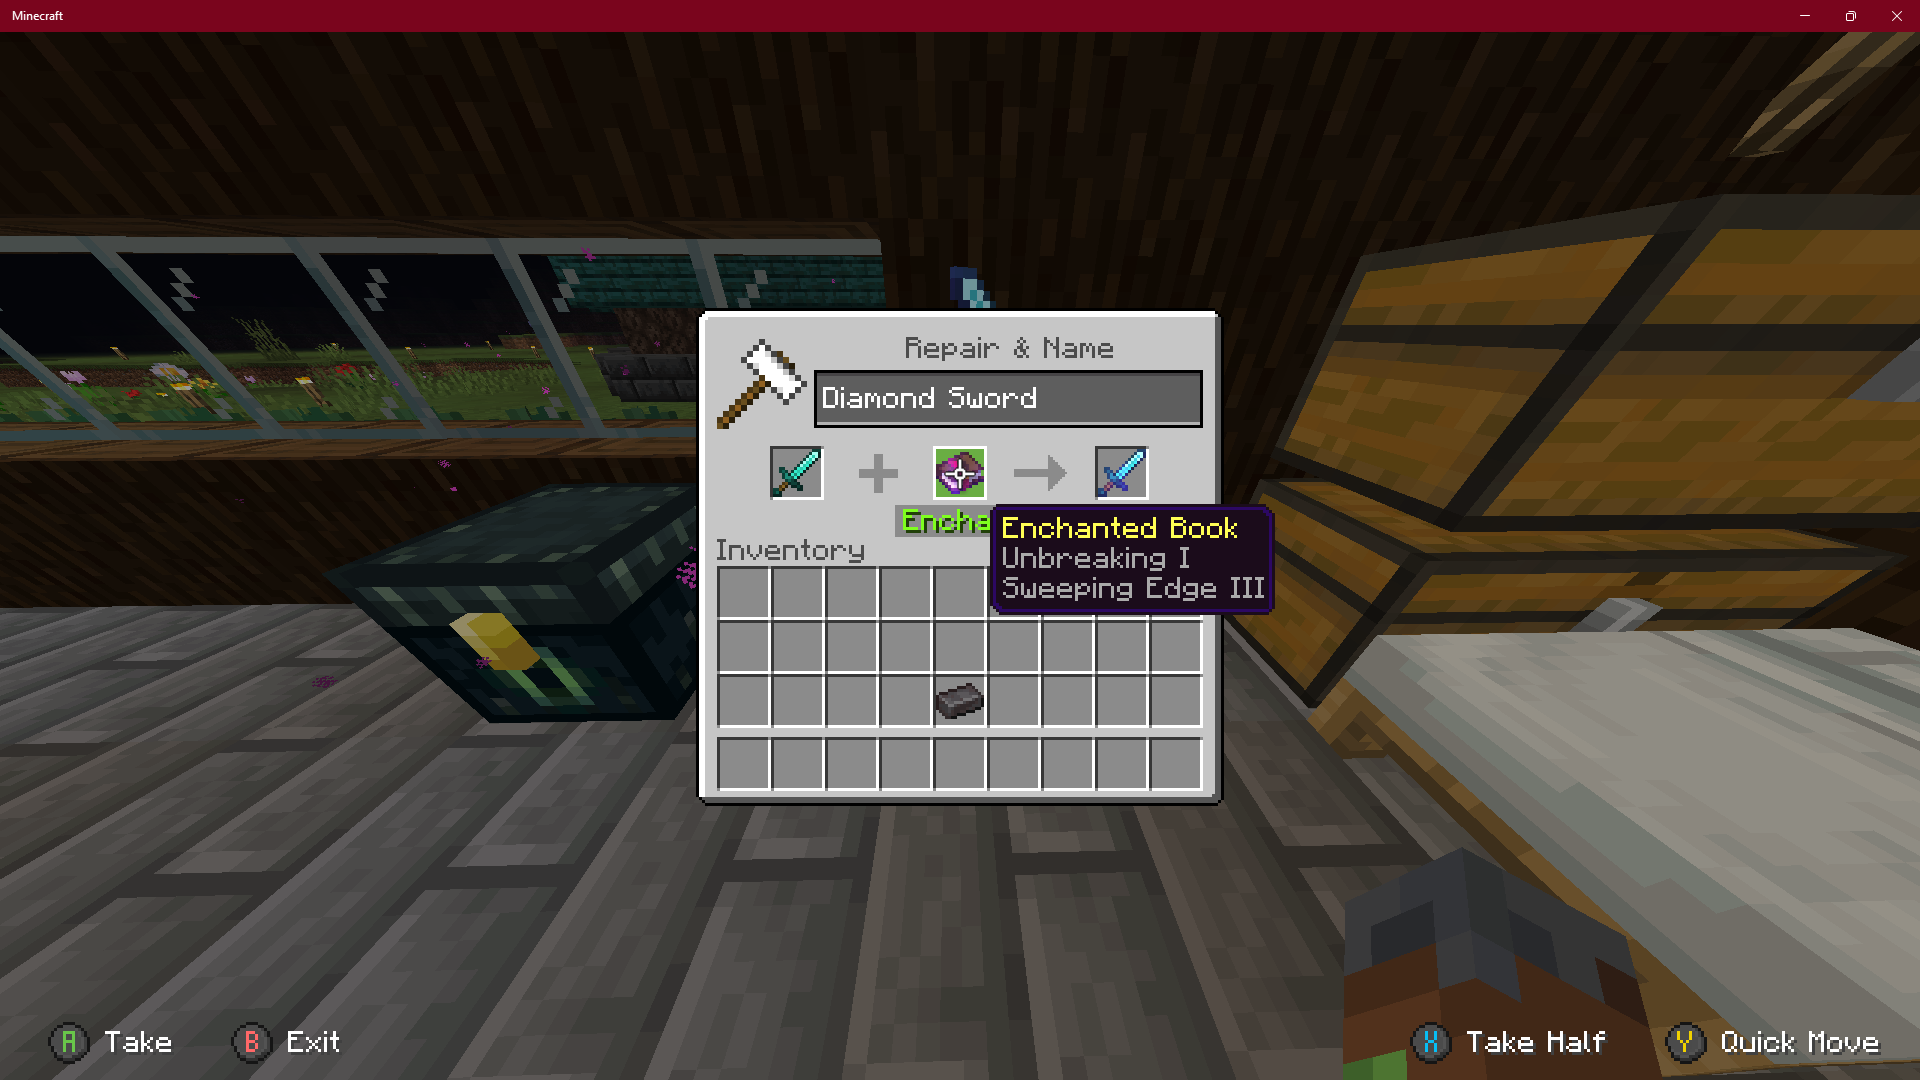 Sweeping Edge Book Results in Anvil Output on Bedrock Edition in Geyser